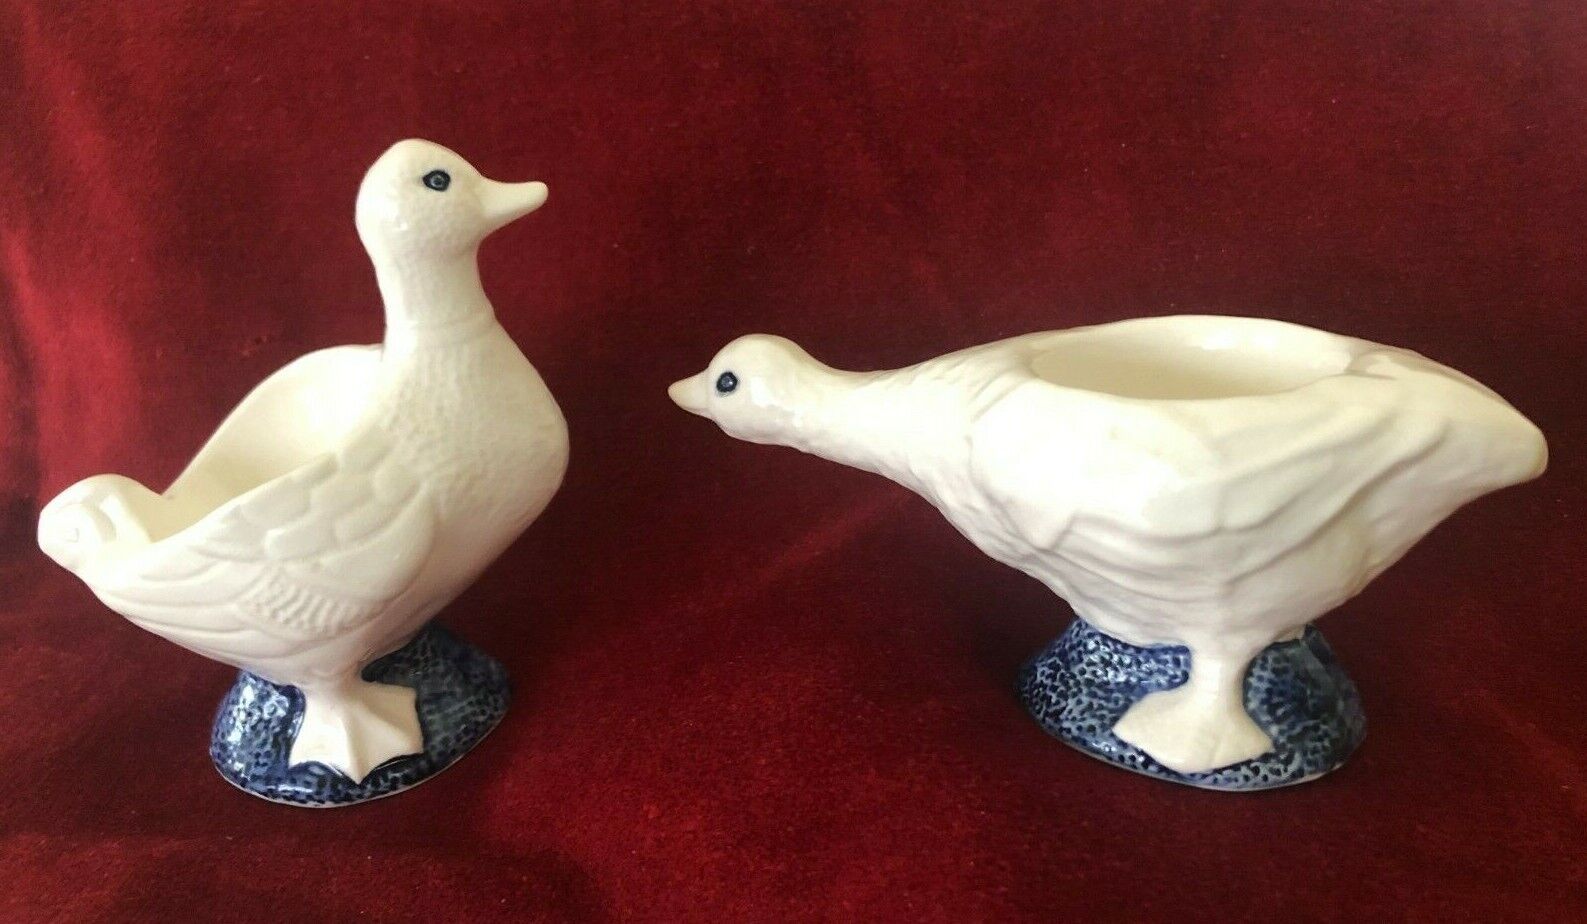 RARE Vtg ART POTTERY - 2 WHIMSICAL GEESE EGG CUPS - Artisan HAND-CRAFTED Signed